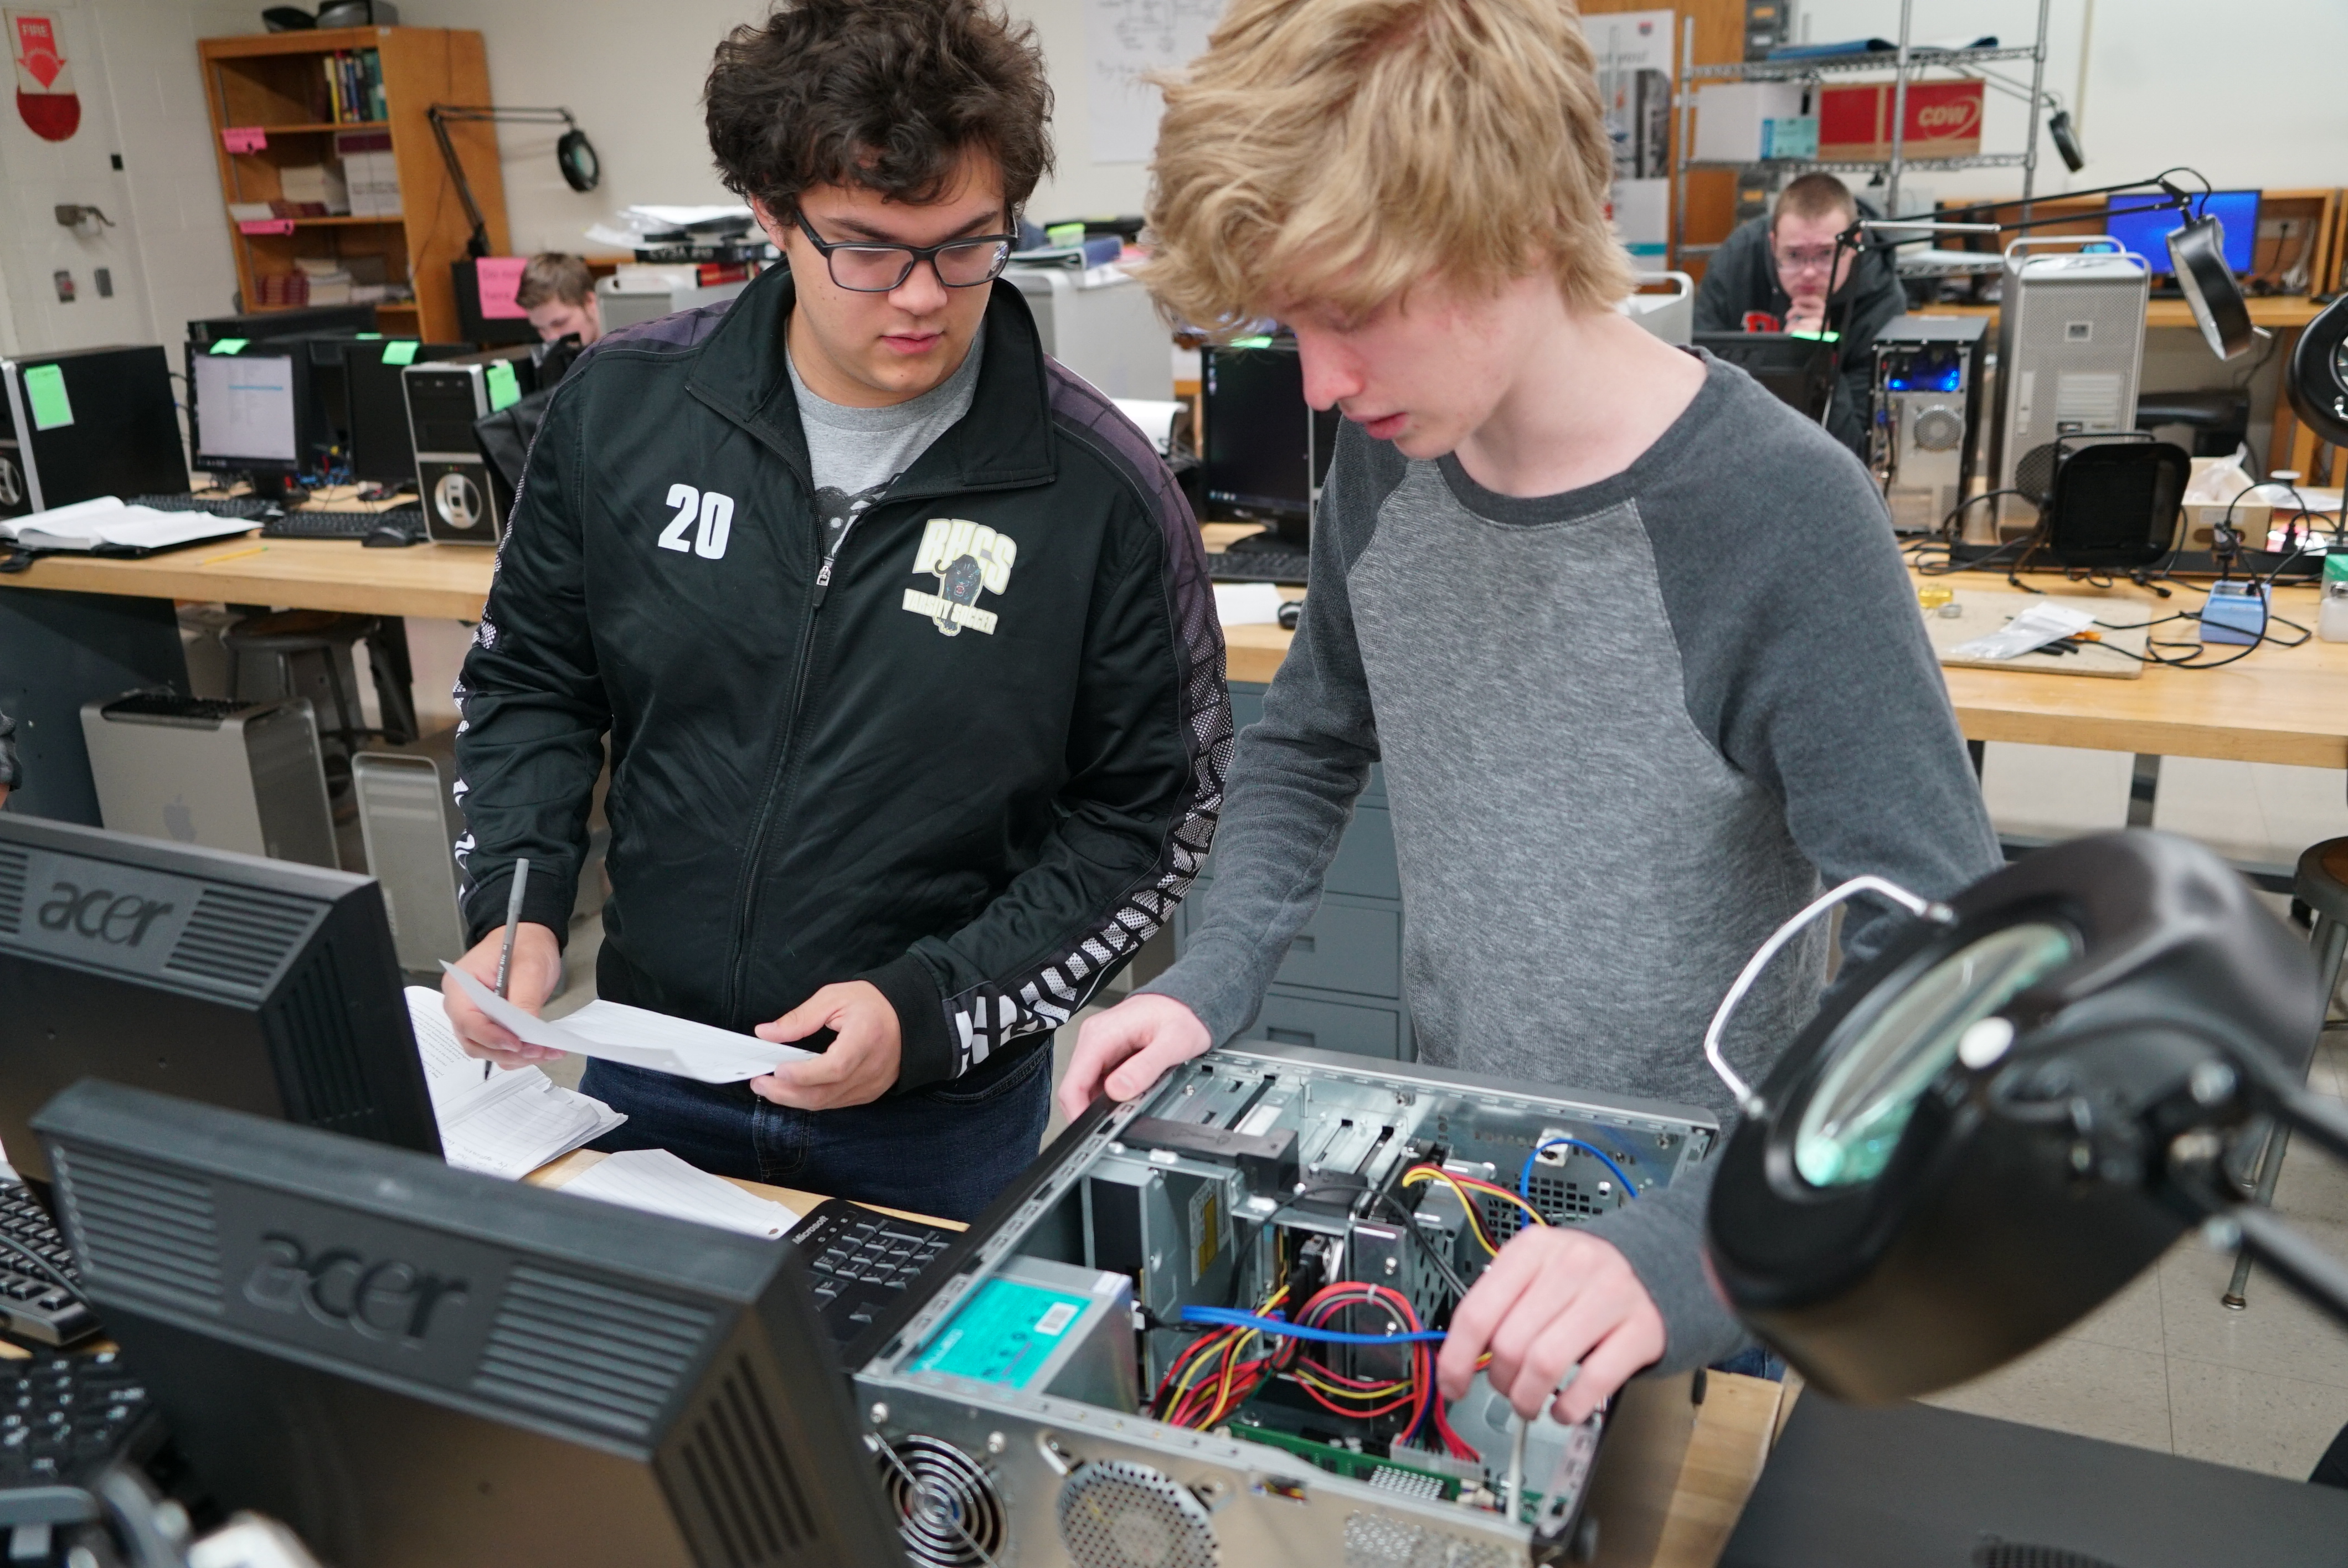 students work together on computer